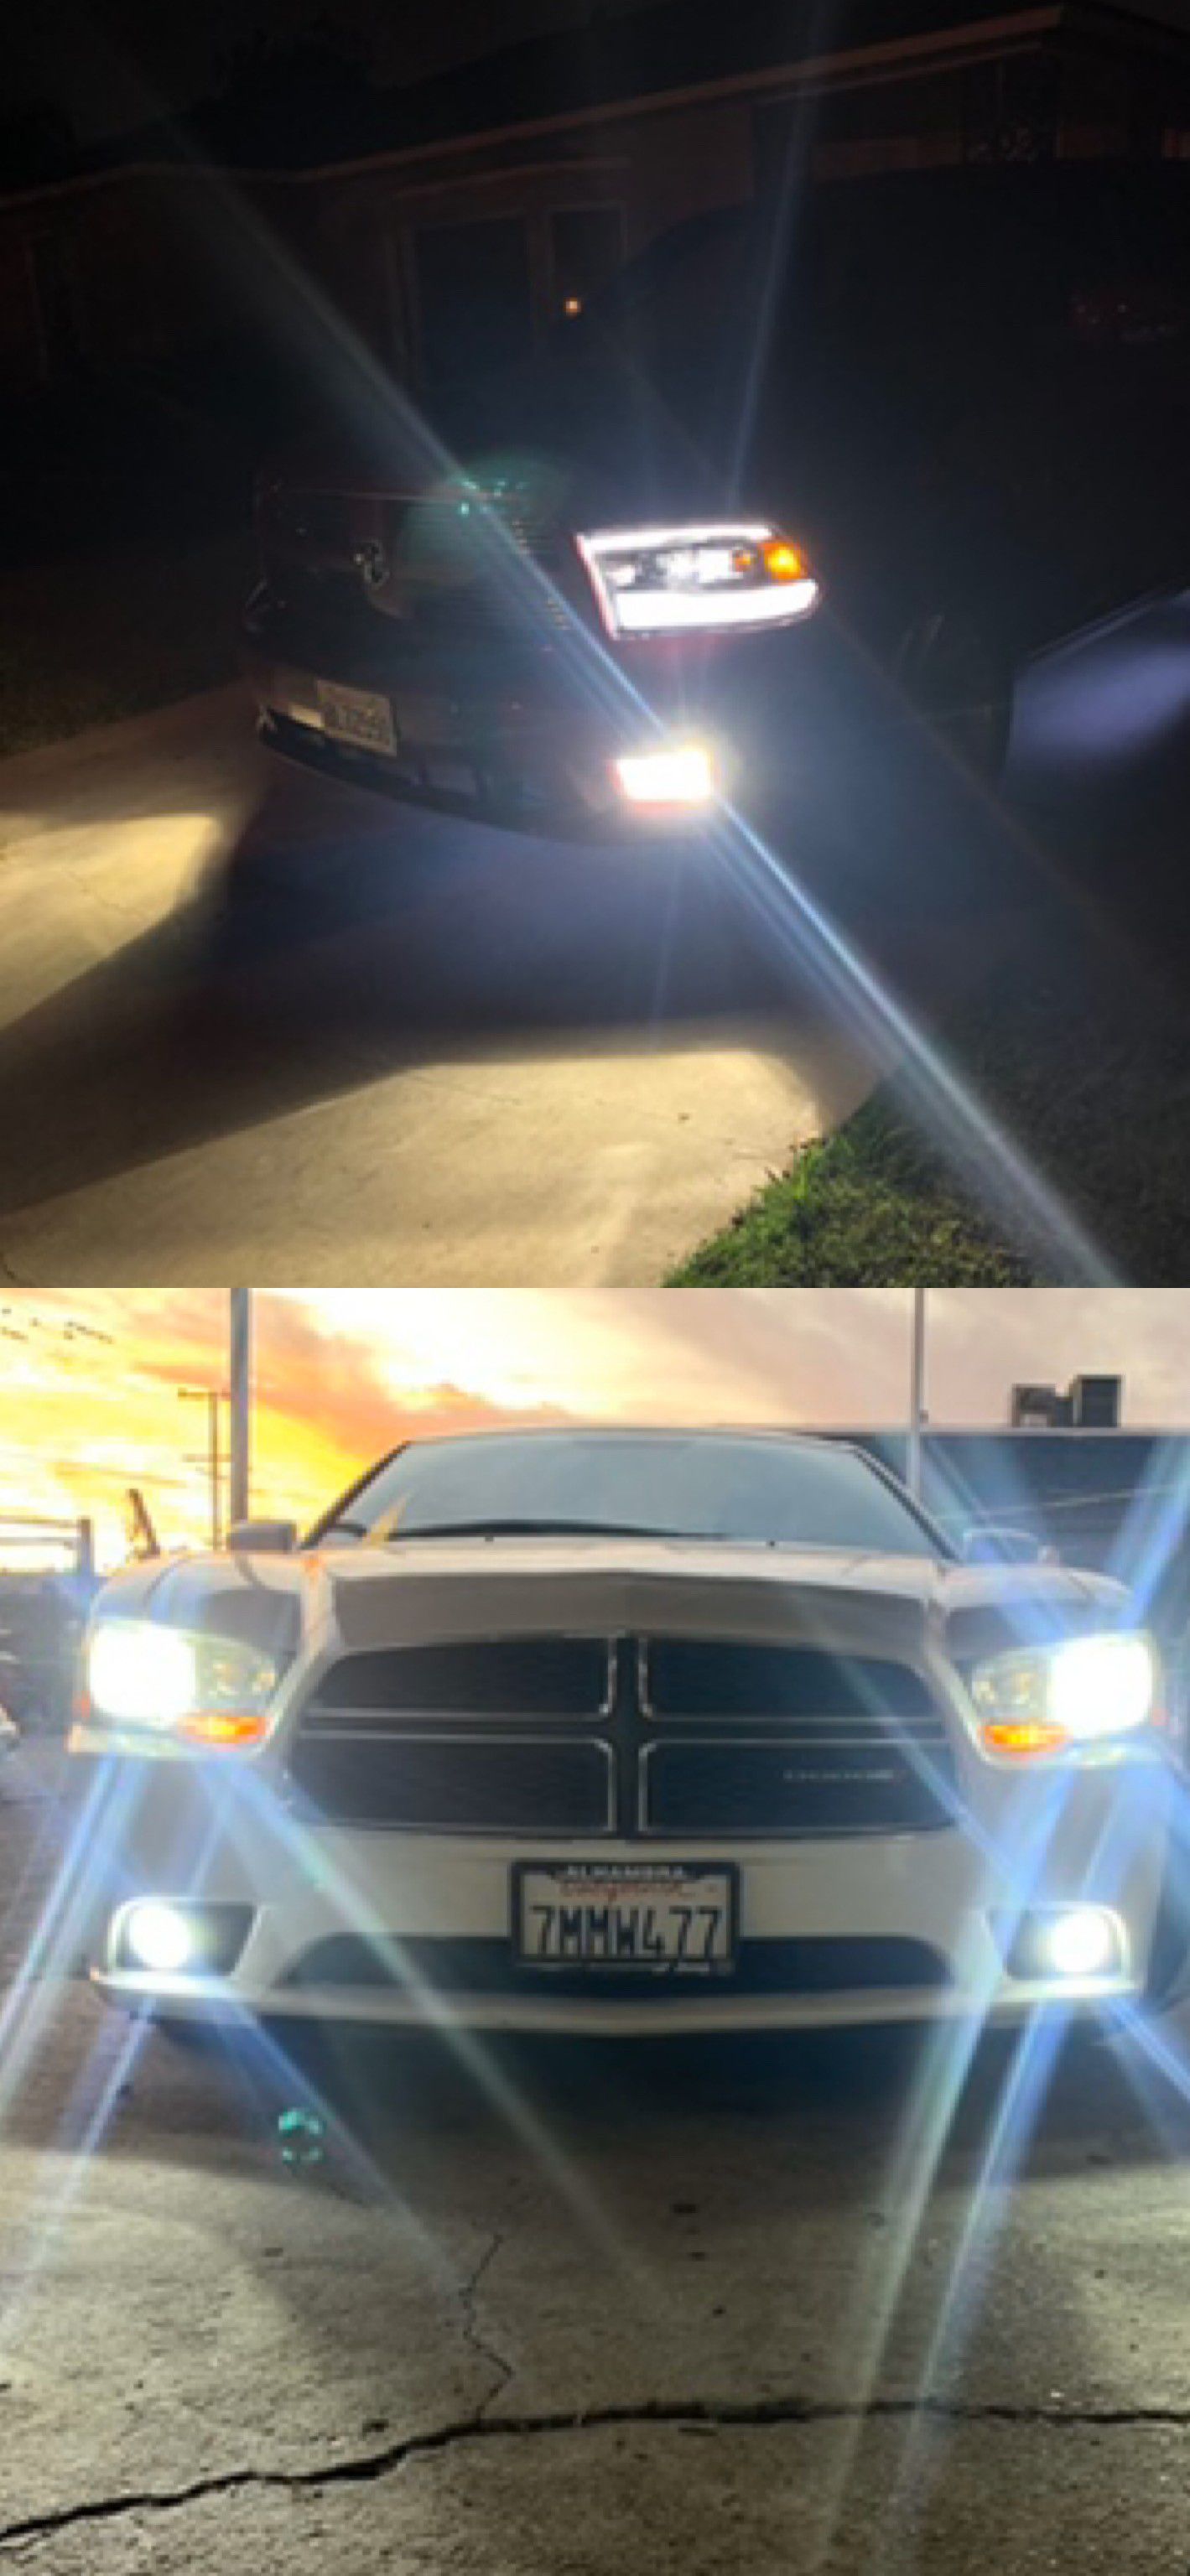 Led headlights 25$ pair free license plate LEDs with purchase